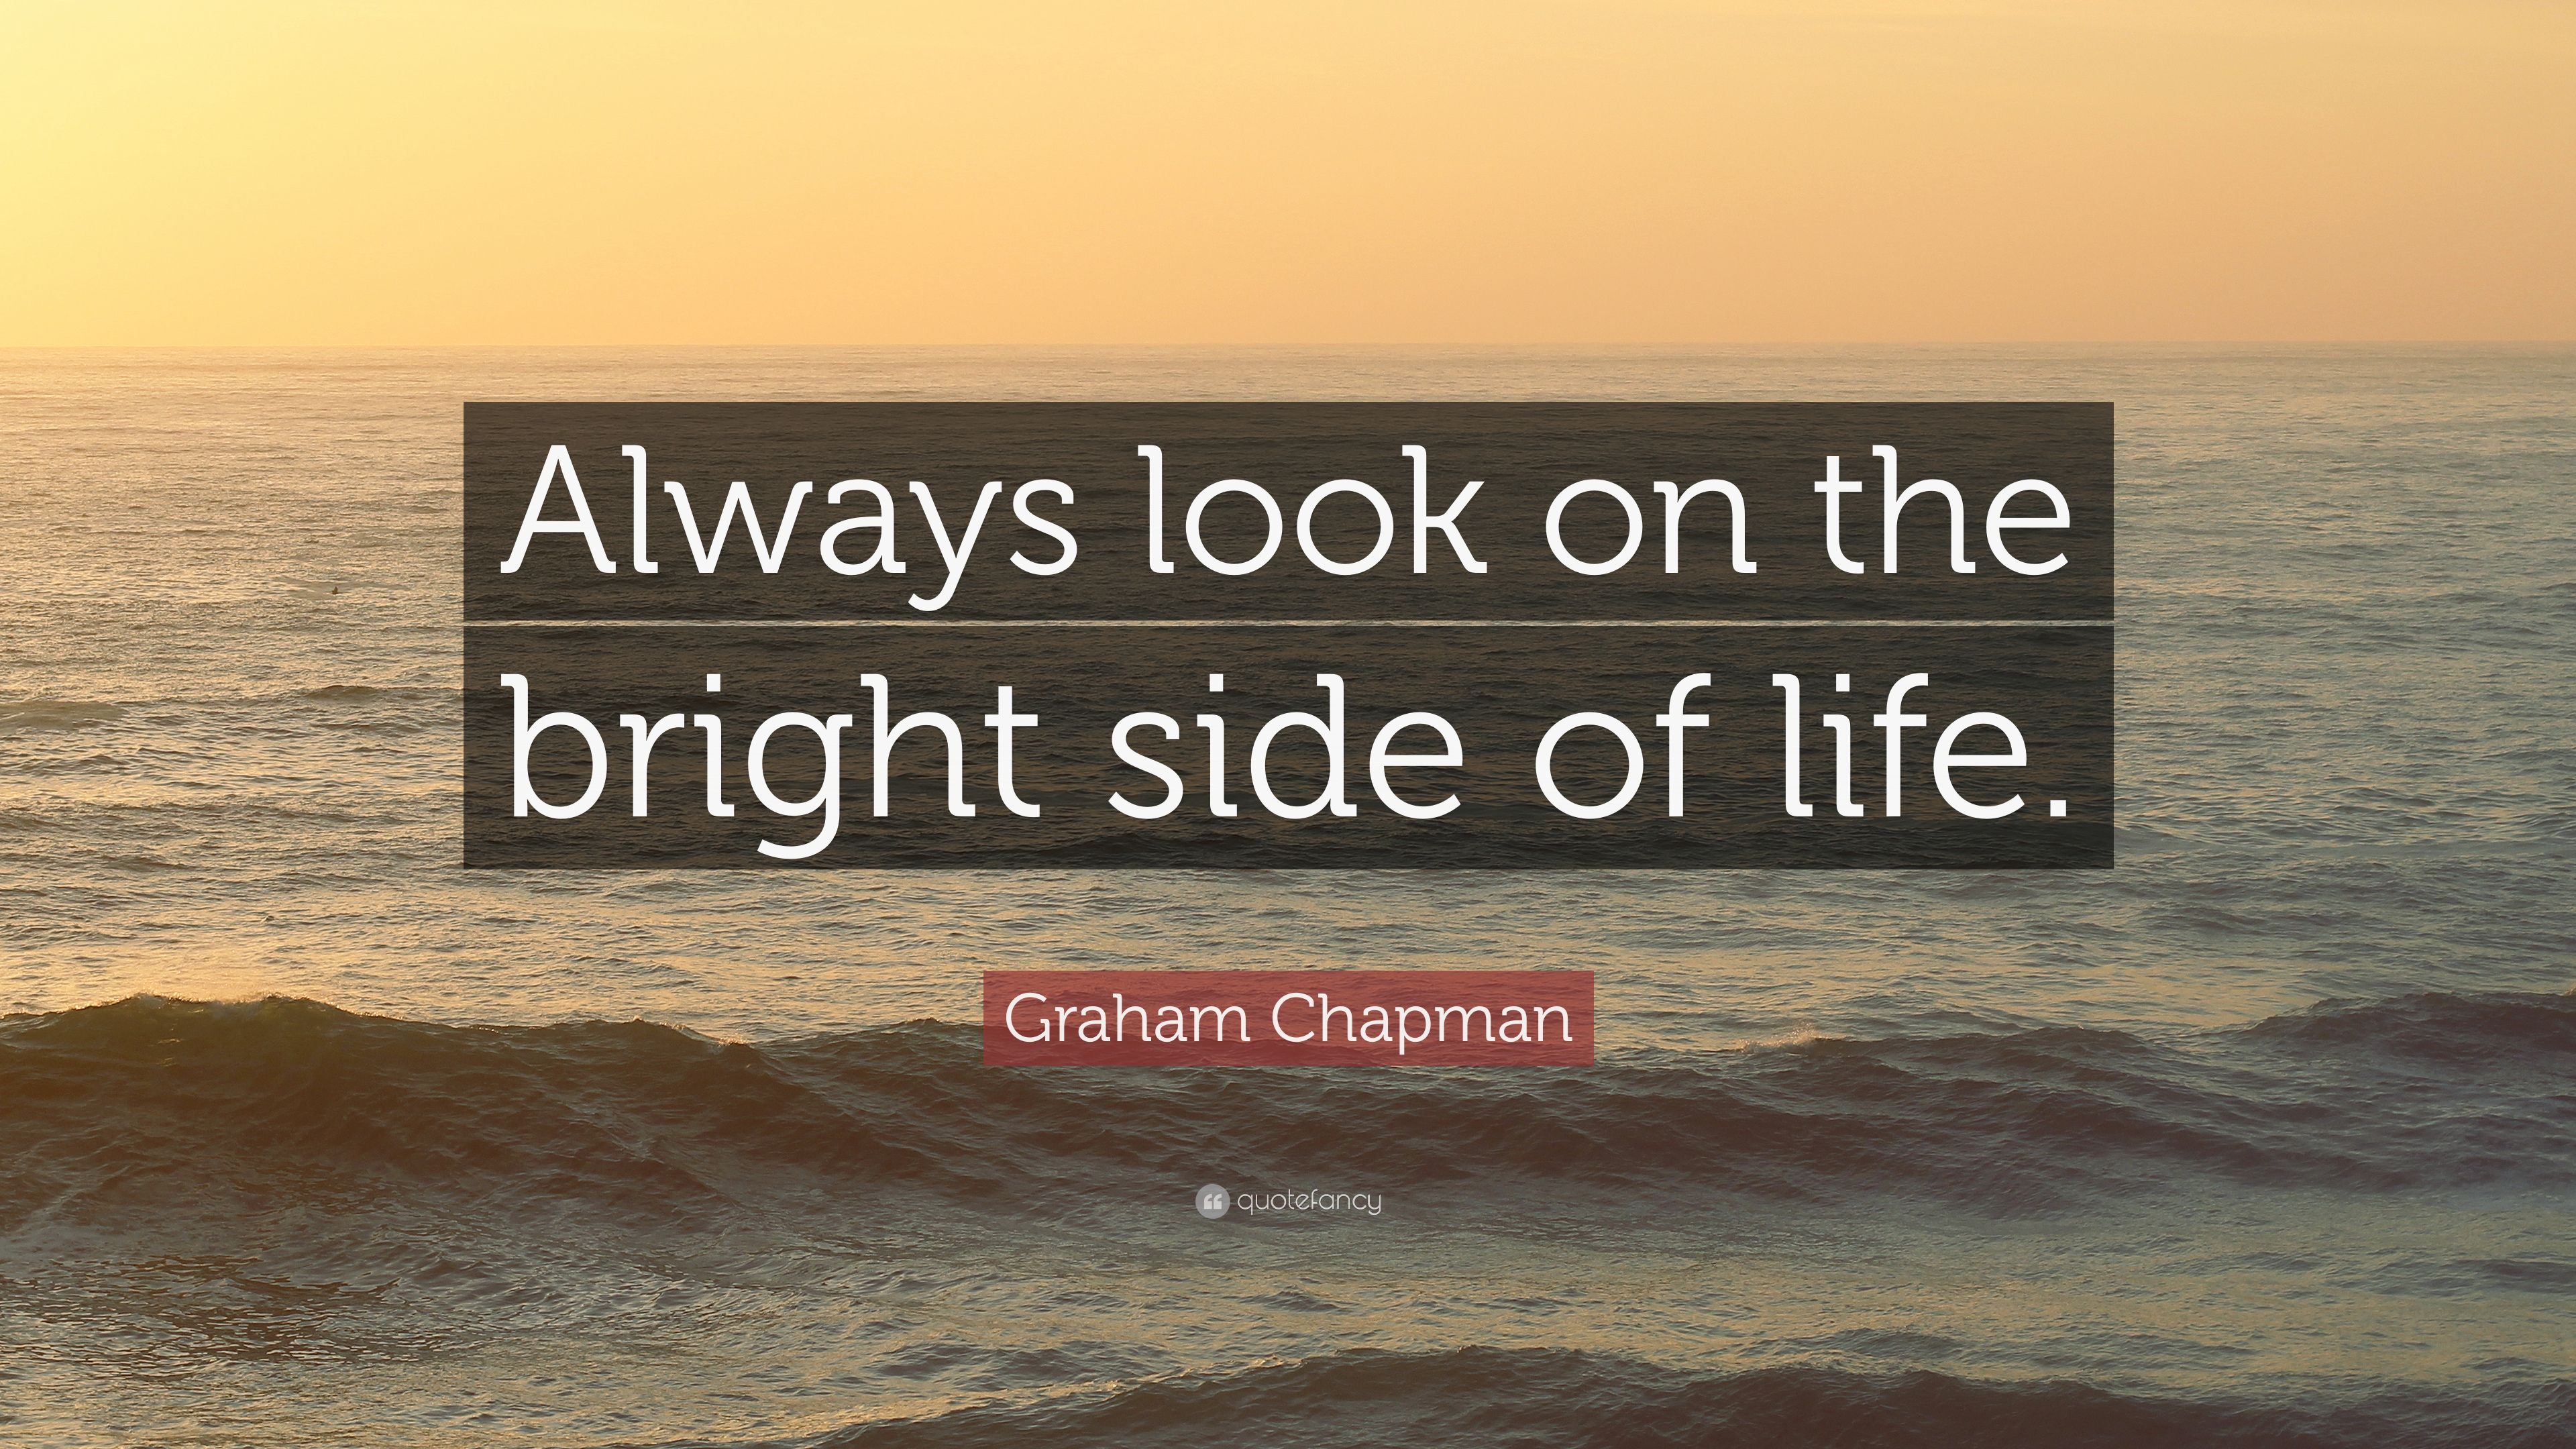 Always look on the bright side of life .quotefancy.com